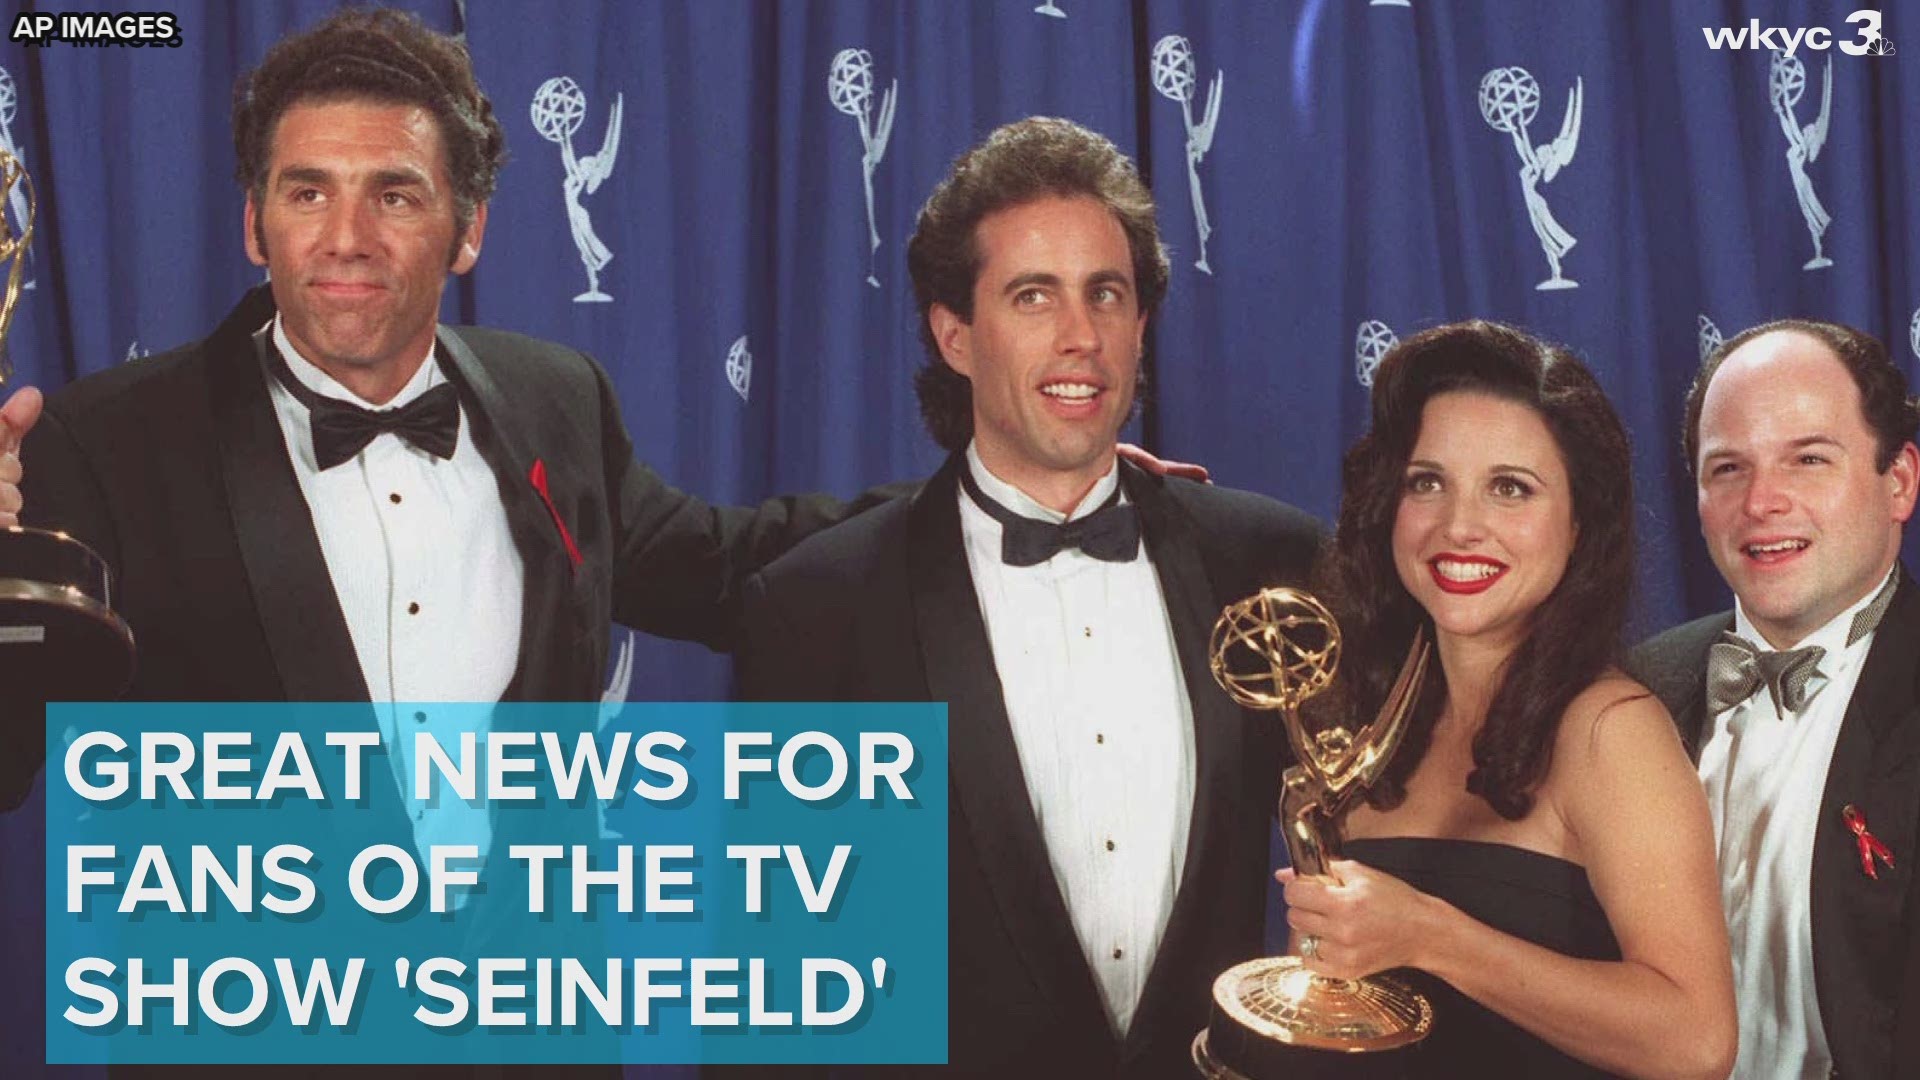 Acquiring rights to 'Seinfeld' is a huge win for the streaming network, which recently lost streaming rights for 'The Office' and 'Friends'